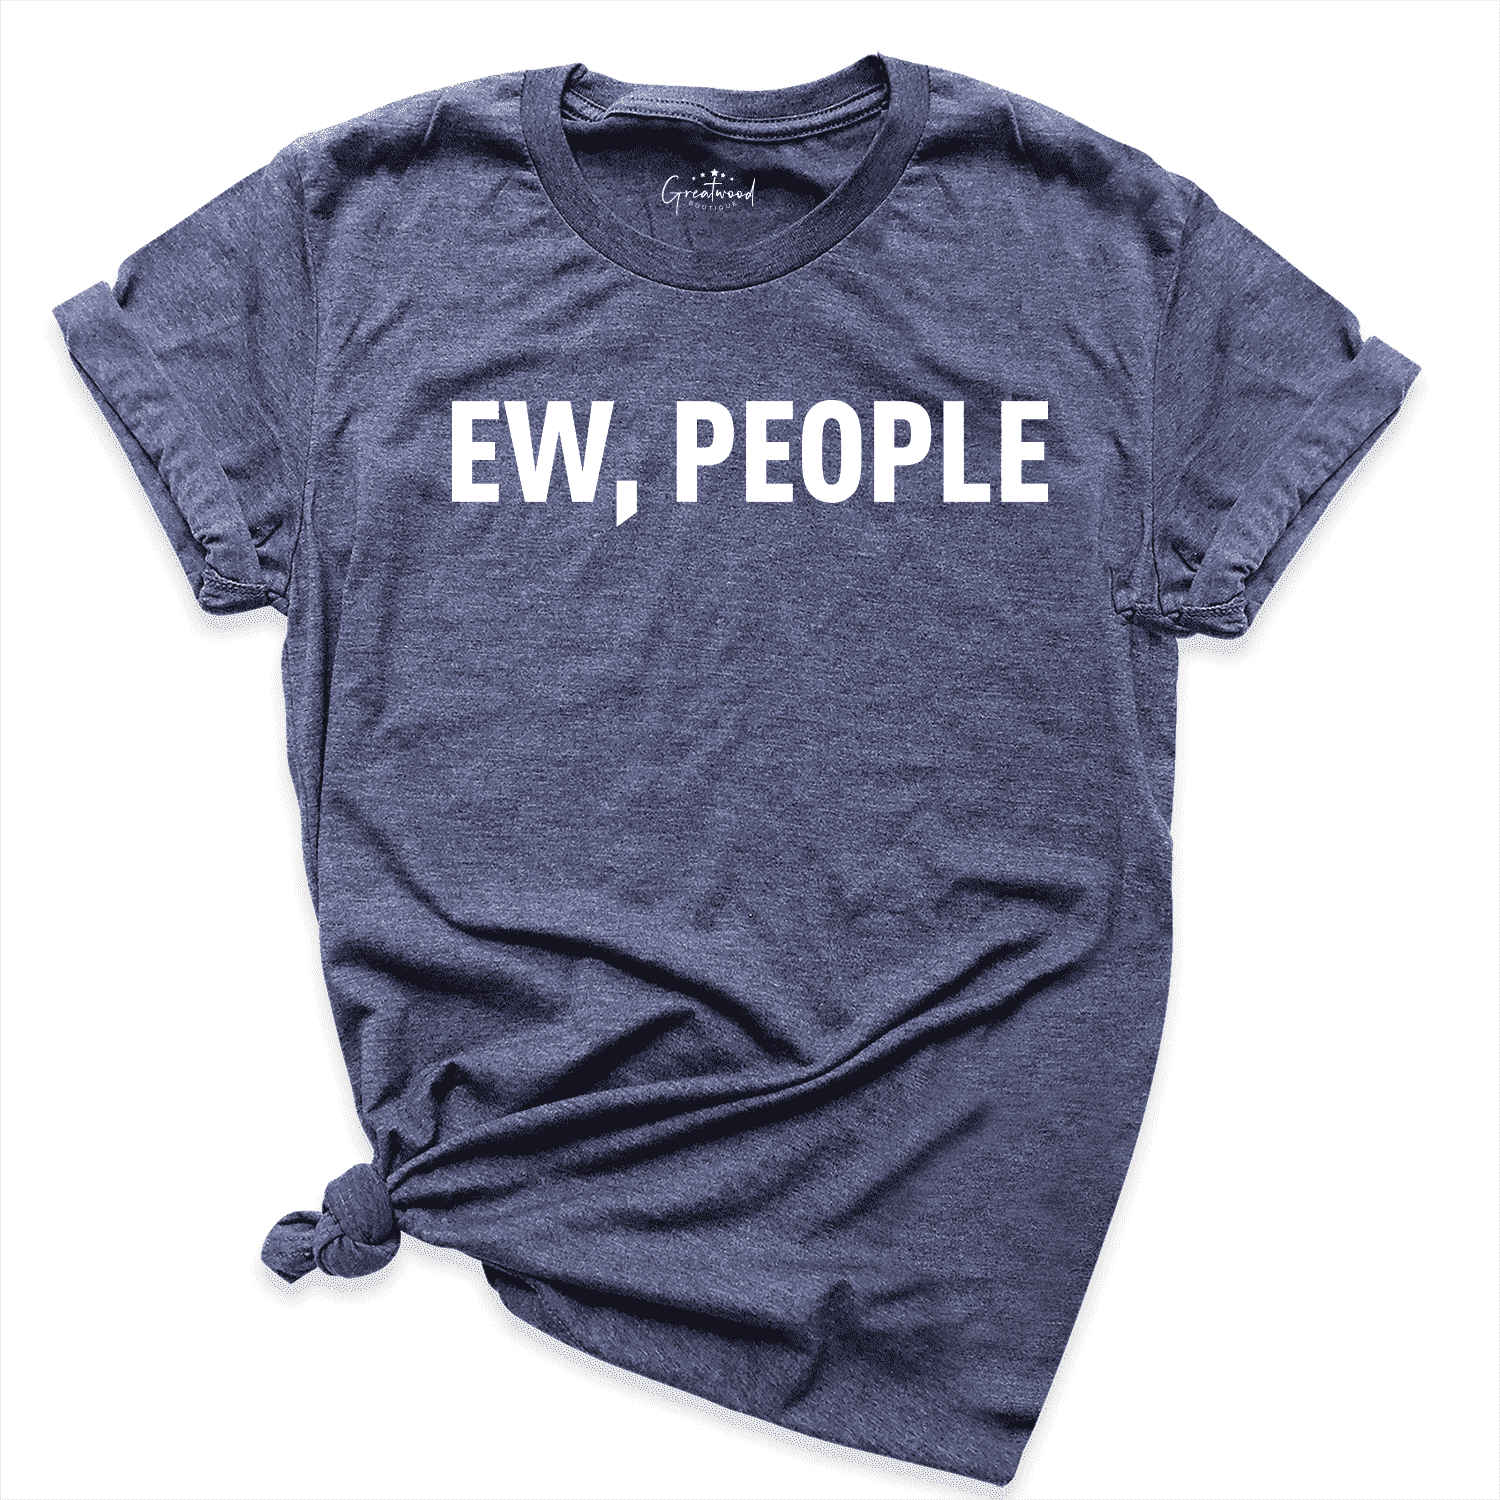 Ew People Shirt Navy - Greatwood Boutique